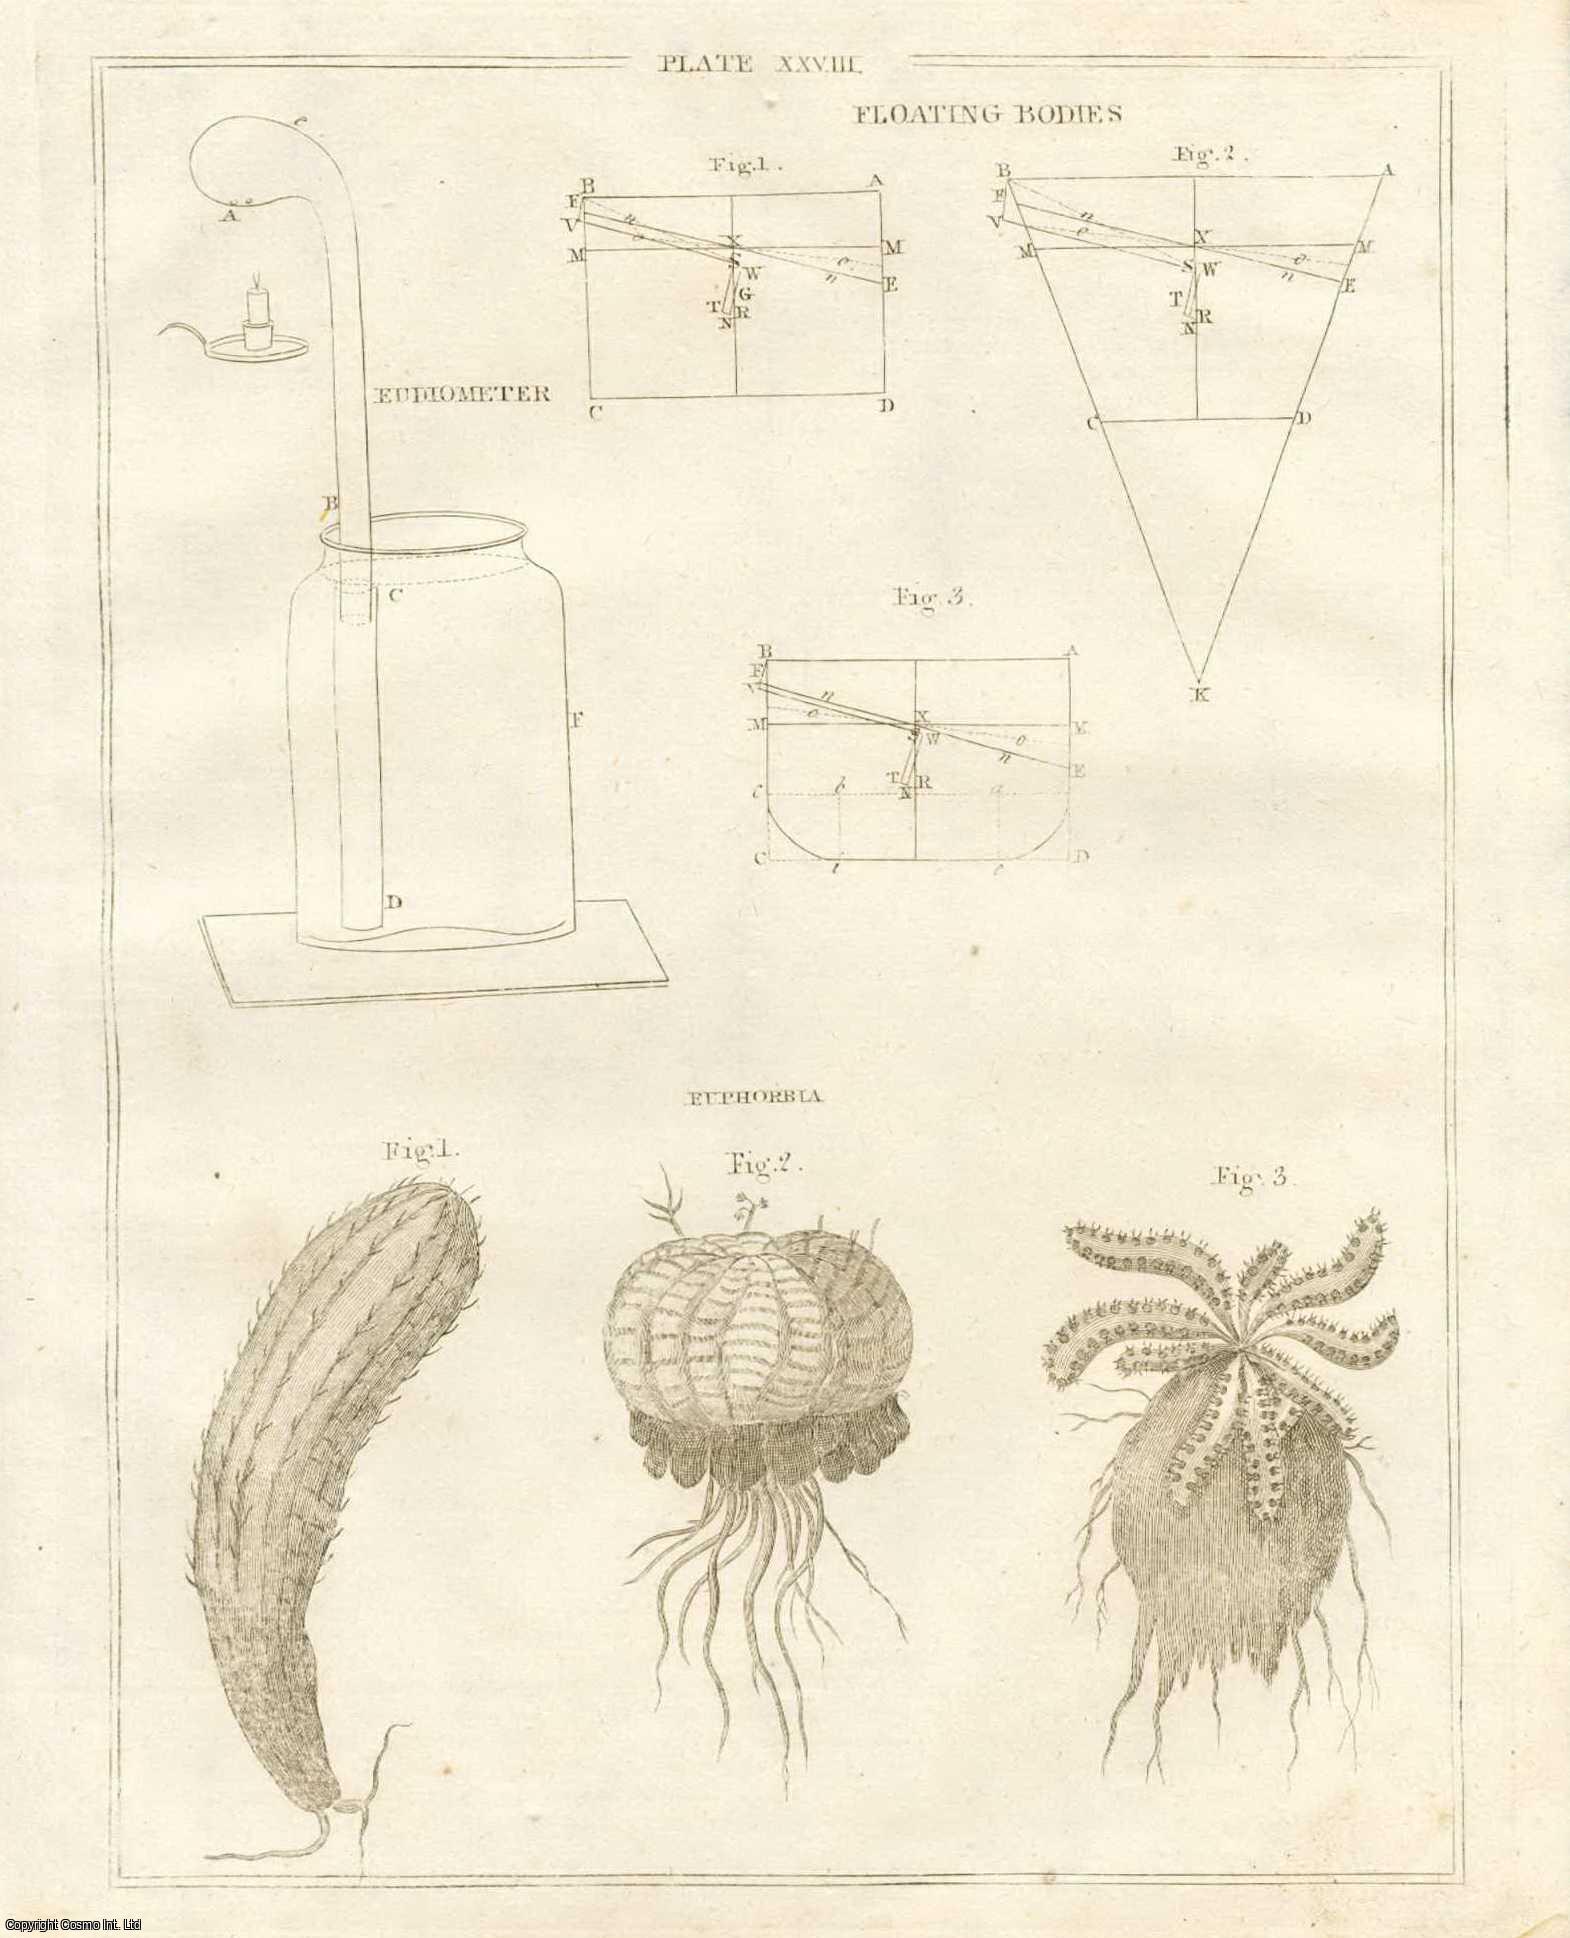 SCIENCE - A plate of scientific interest from the Encyclopaedia Britannica, Dublin Edition 1797.